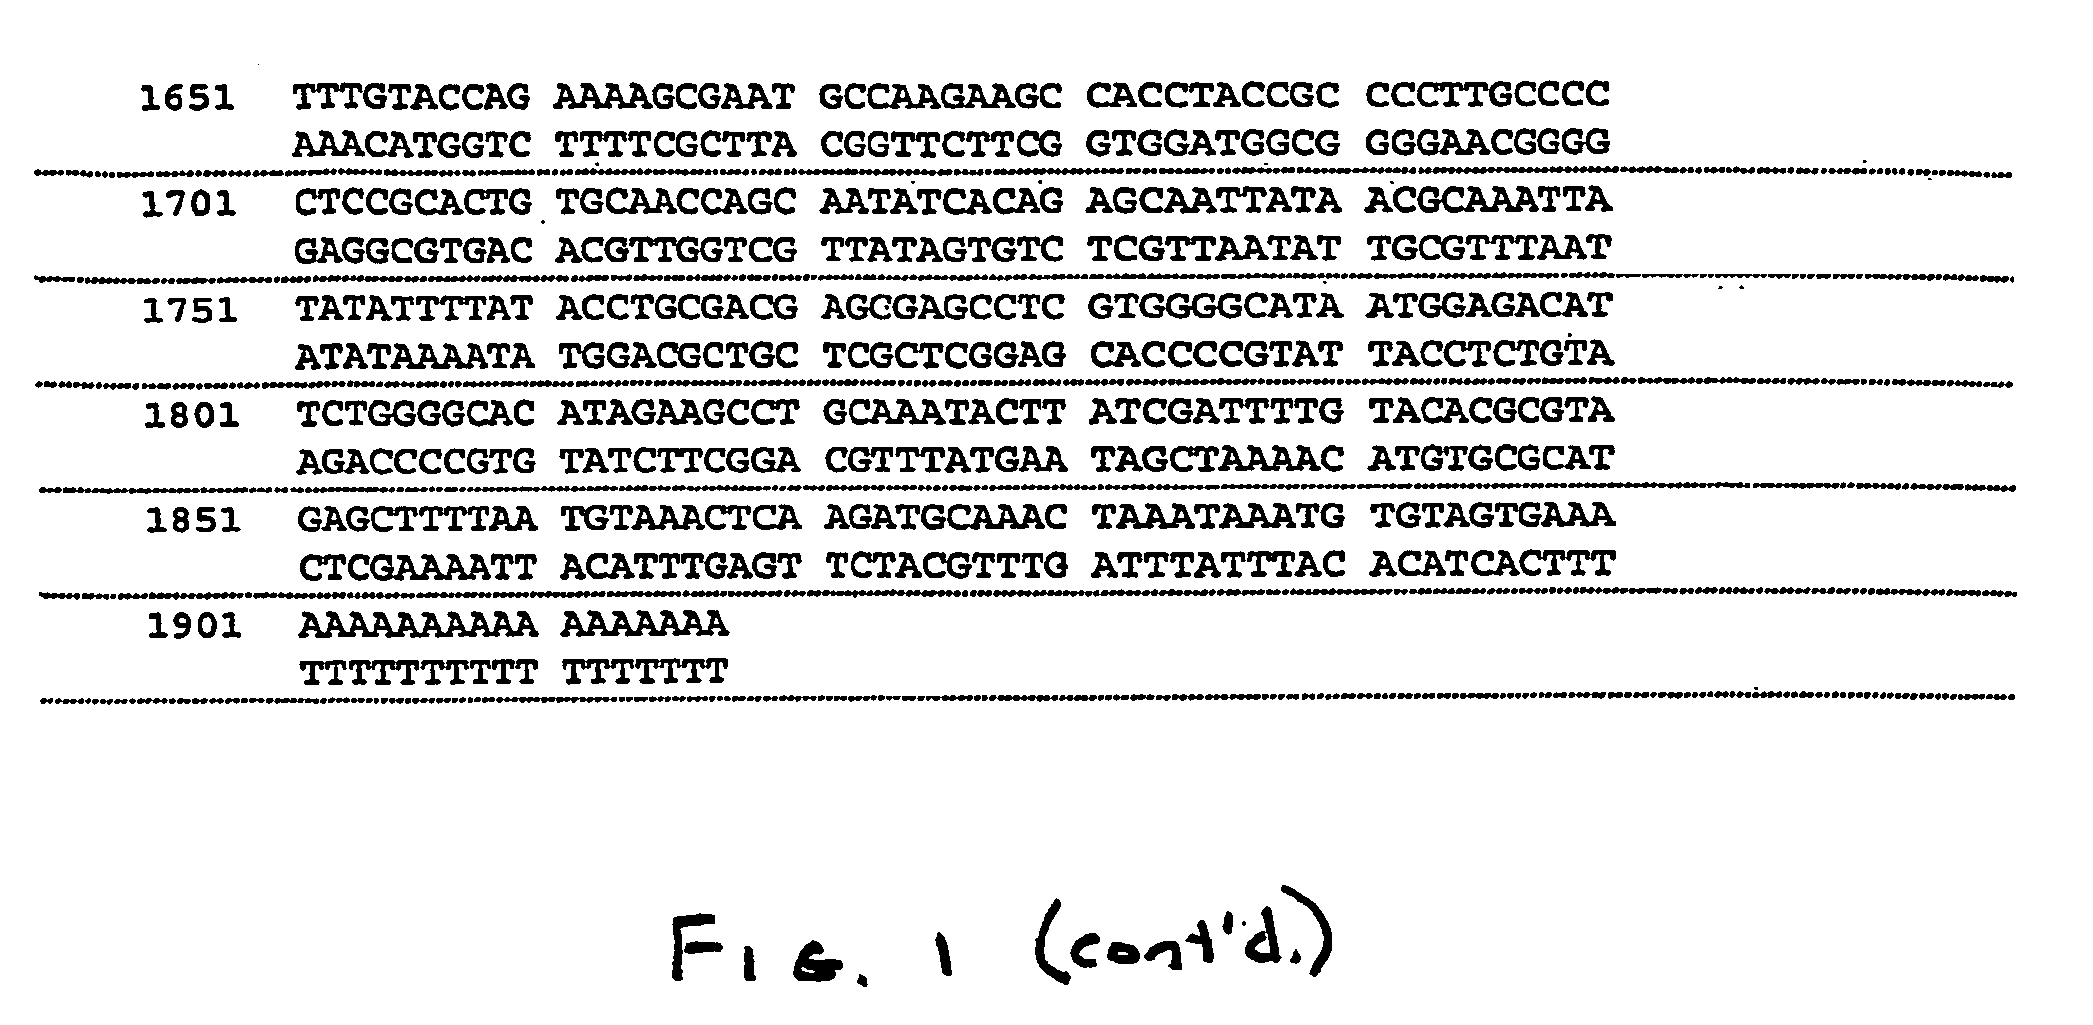 Nucleic acids and proteins of insect or83b odorant receptor genes and uses thereof